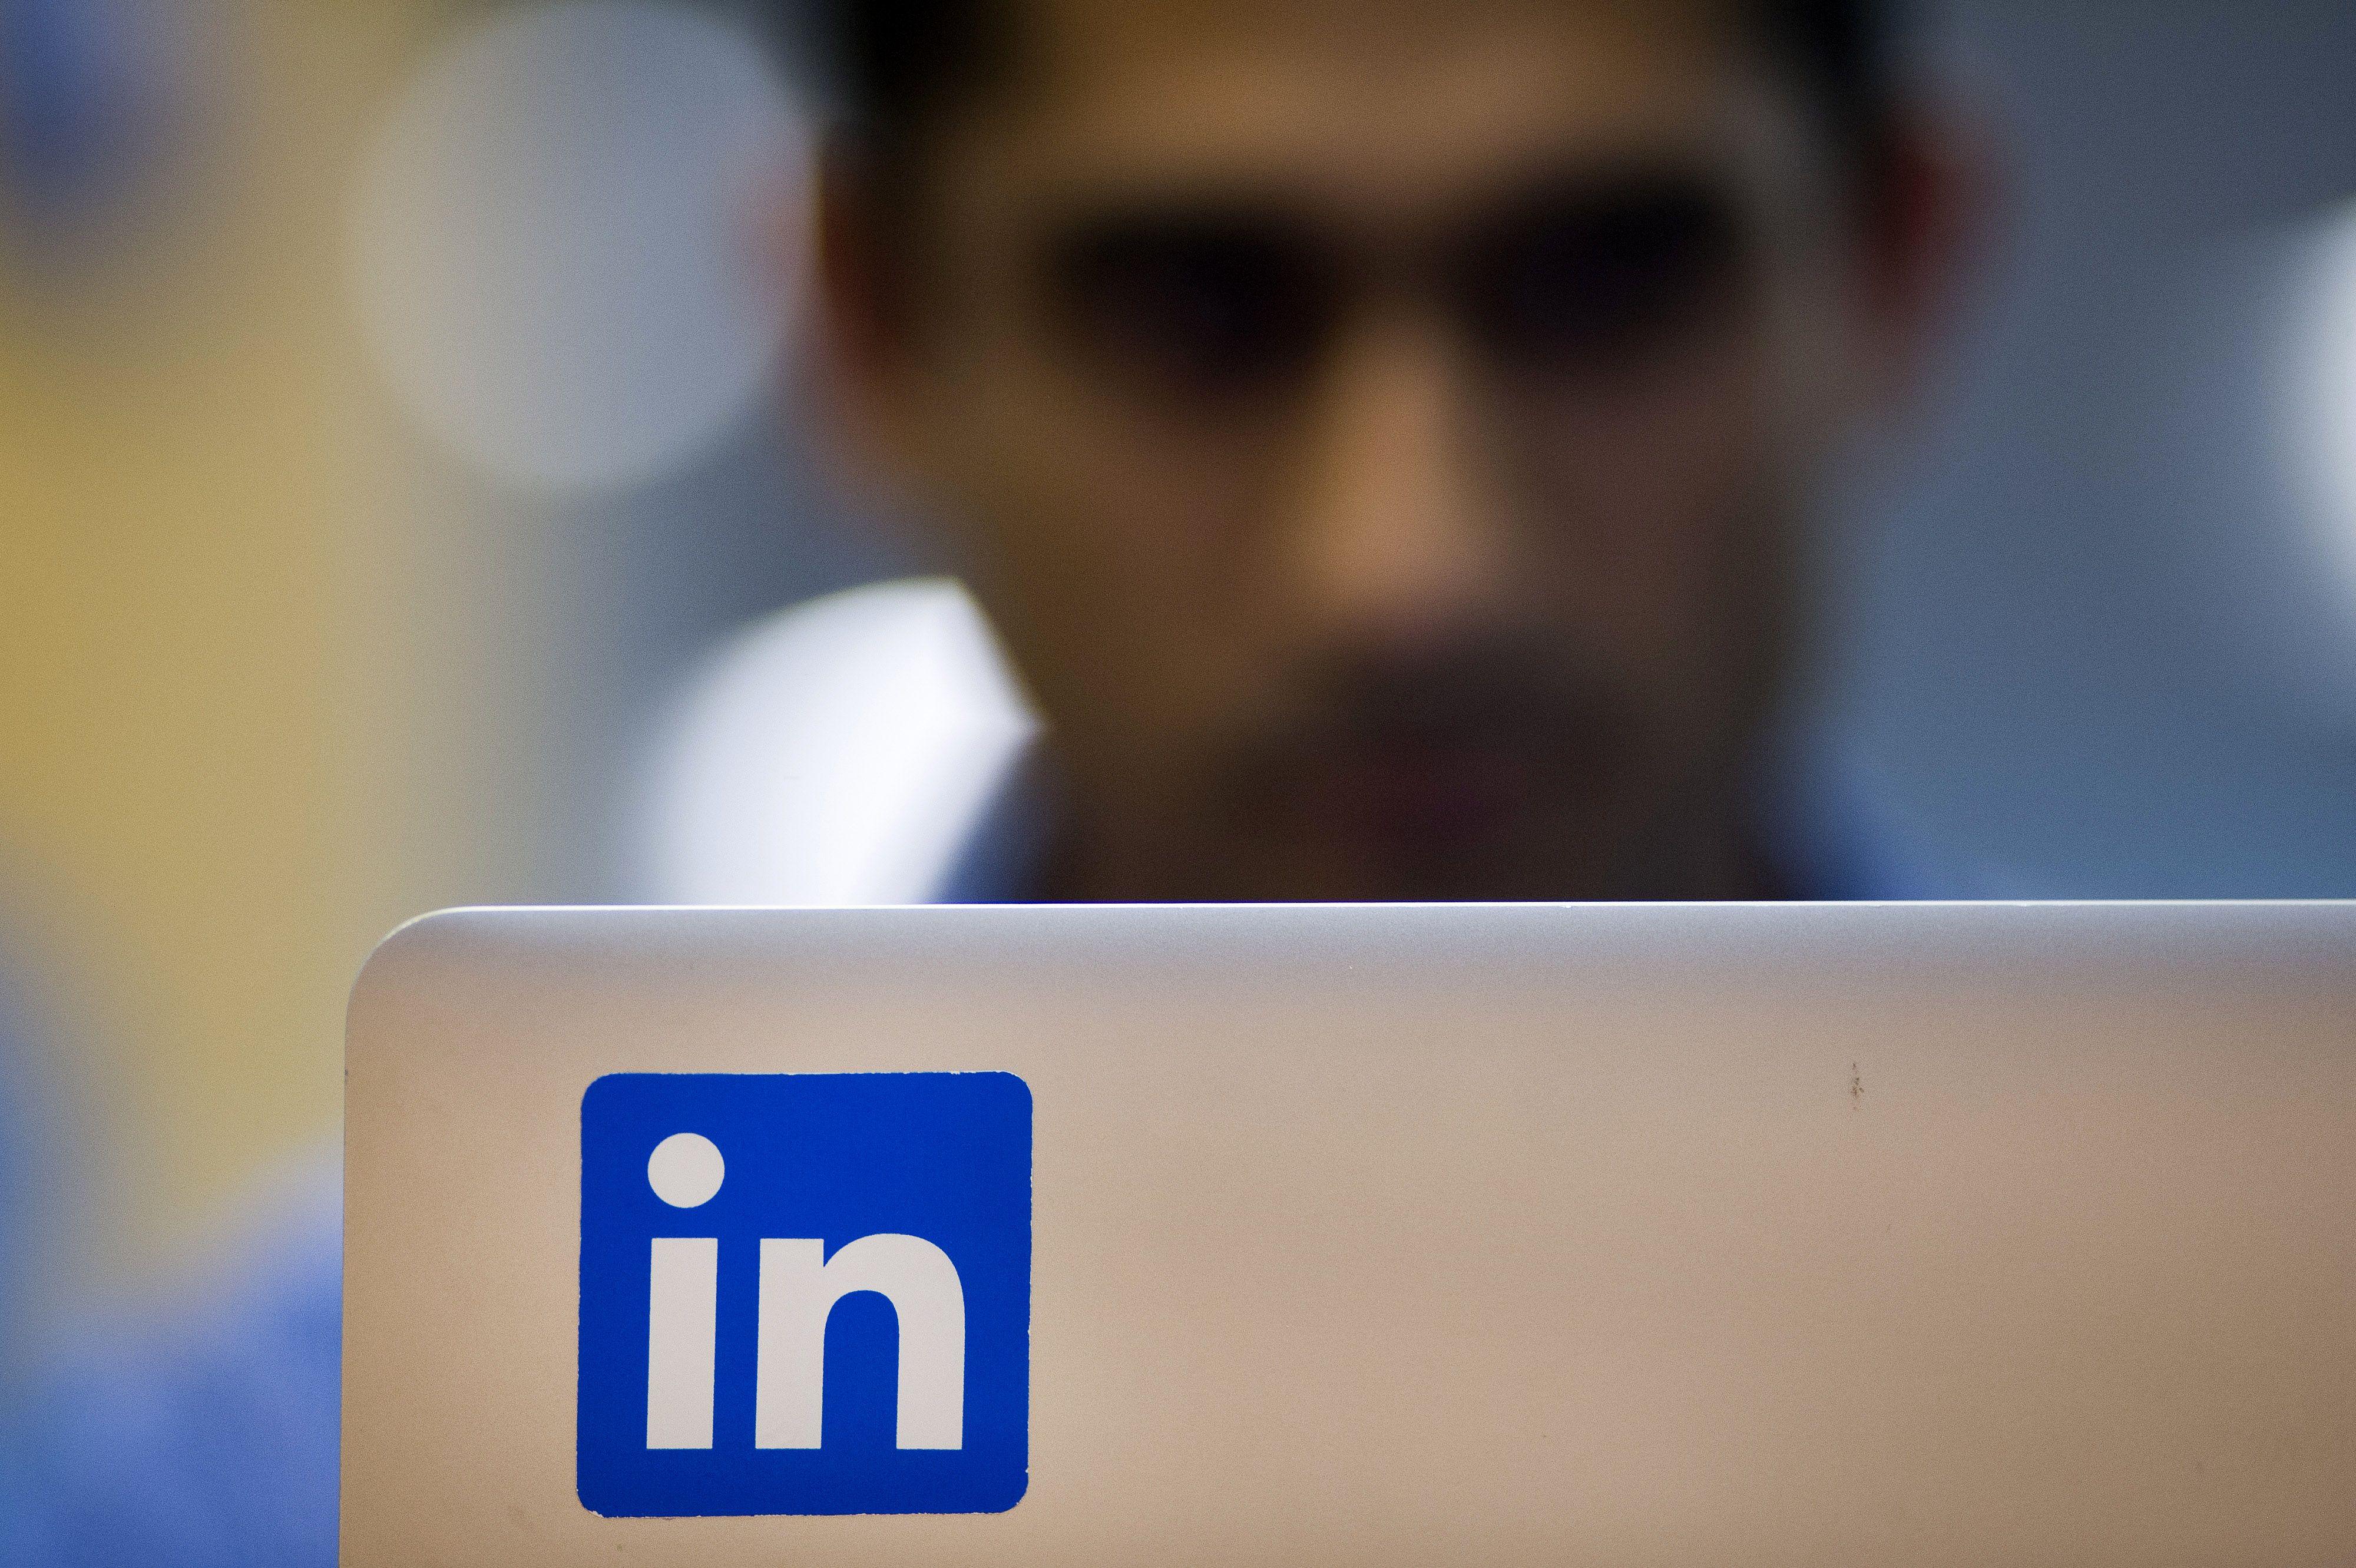 Connect LinkedIn Logo - LinkedIn Facebook: Be Careful With Whom You Connect | Fortune